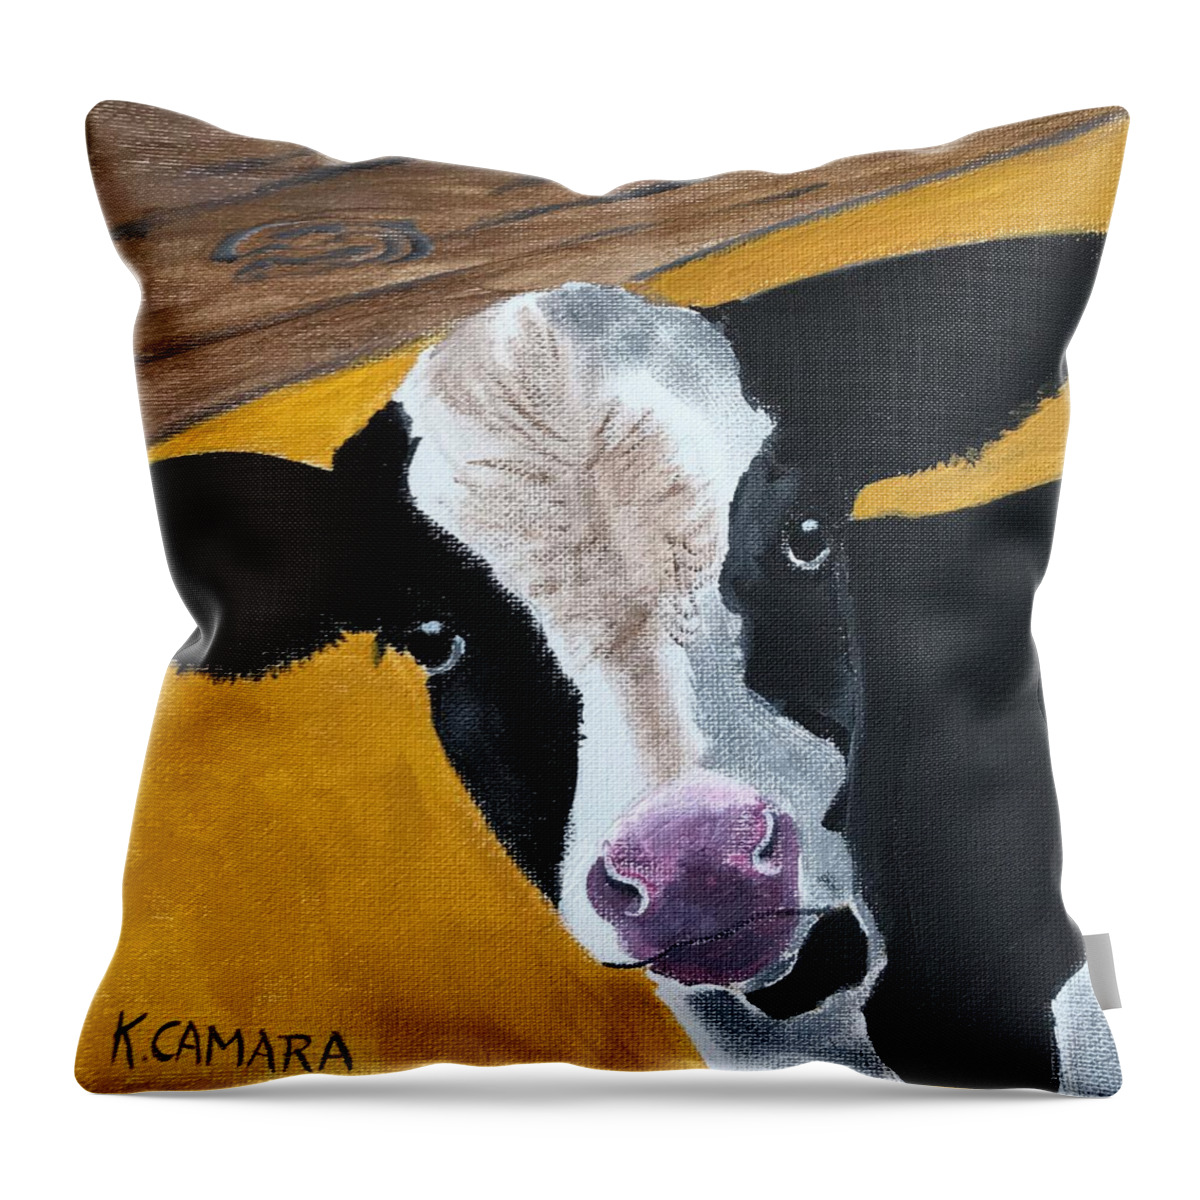 Pets Throw Pillow featuring the painting Moo Cow by Kathie Camara